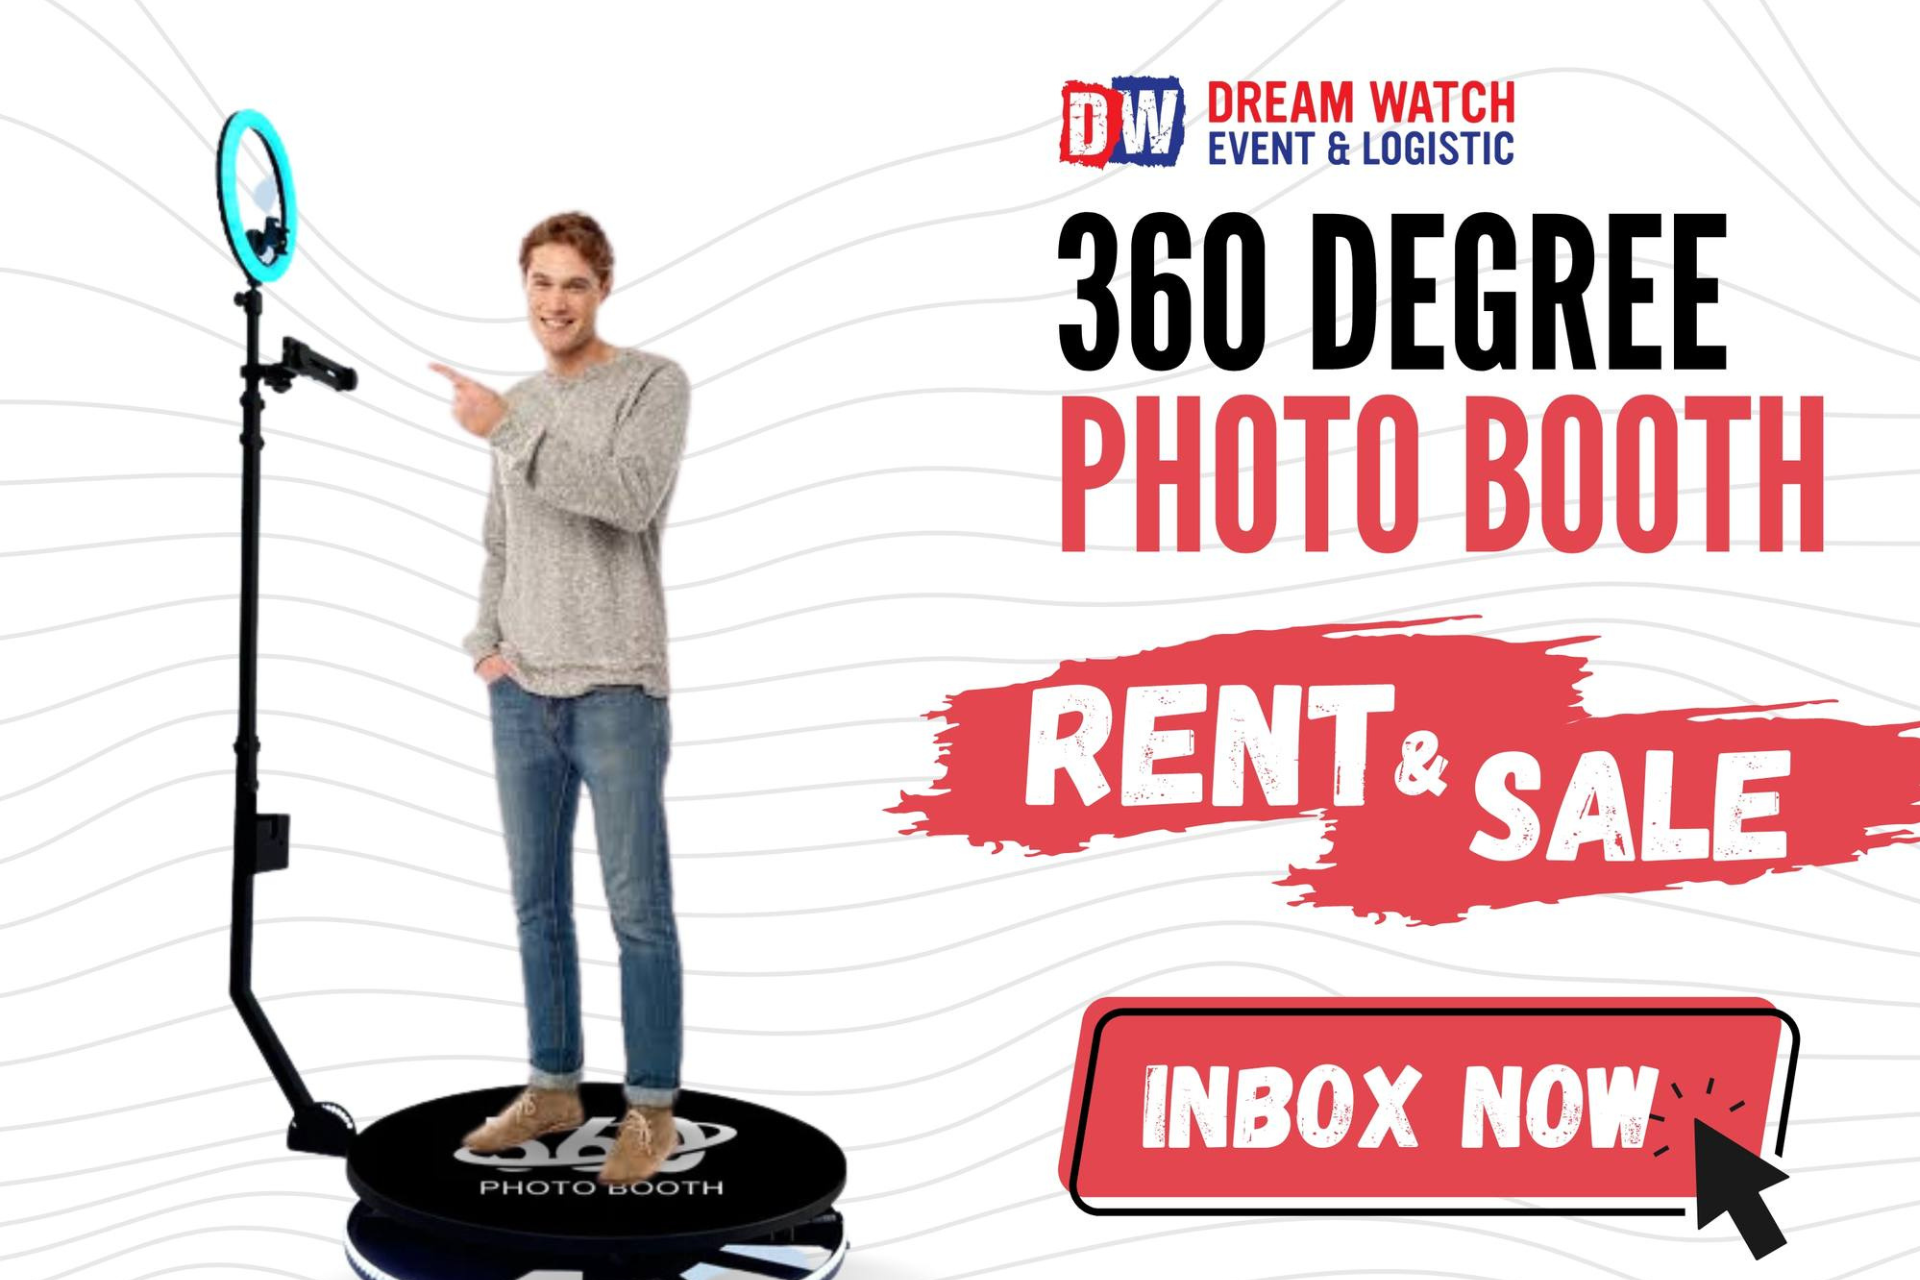 360 Degree Photo Booth Rental in Dhaka | DreamWatch event